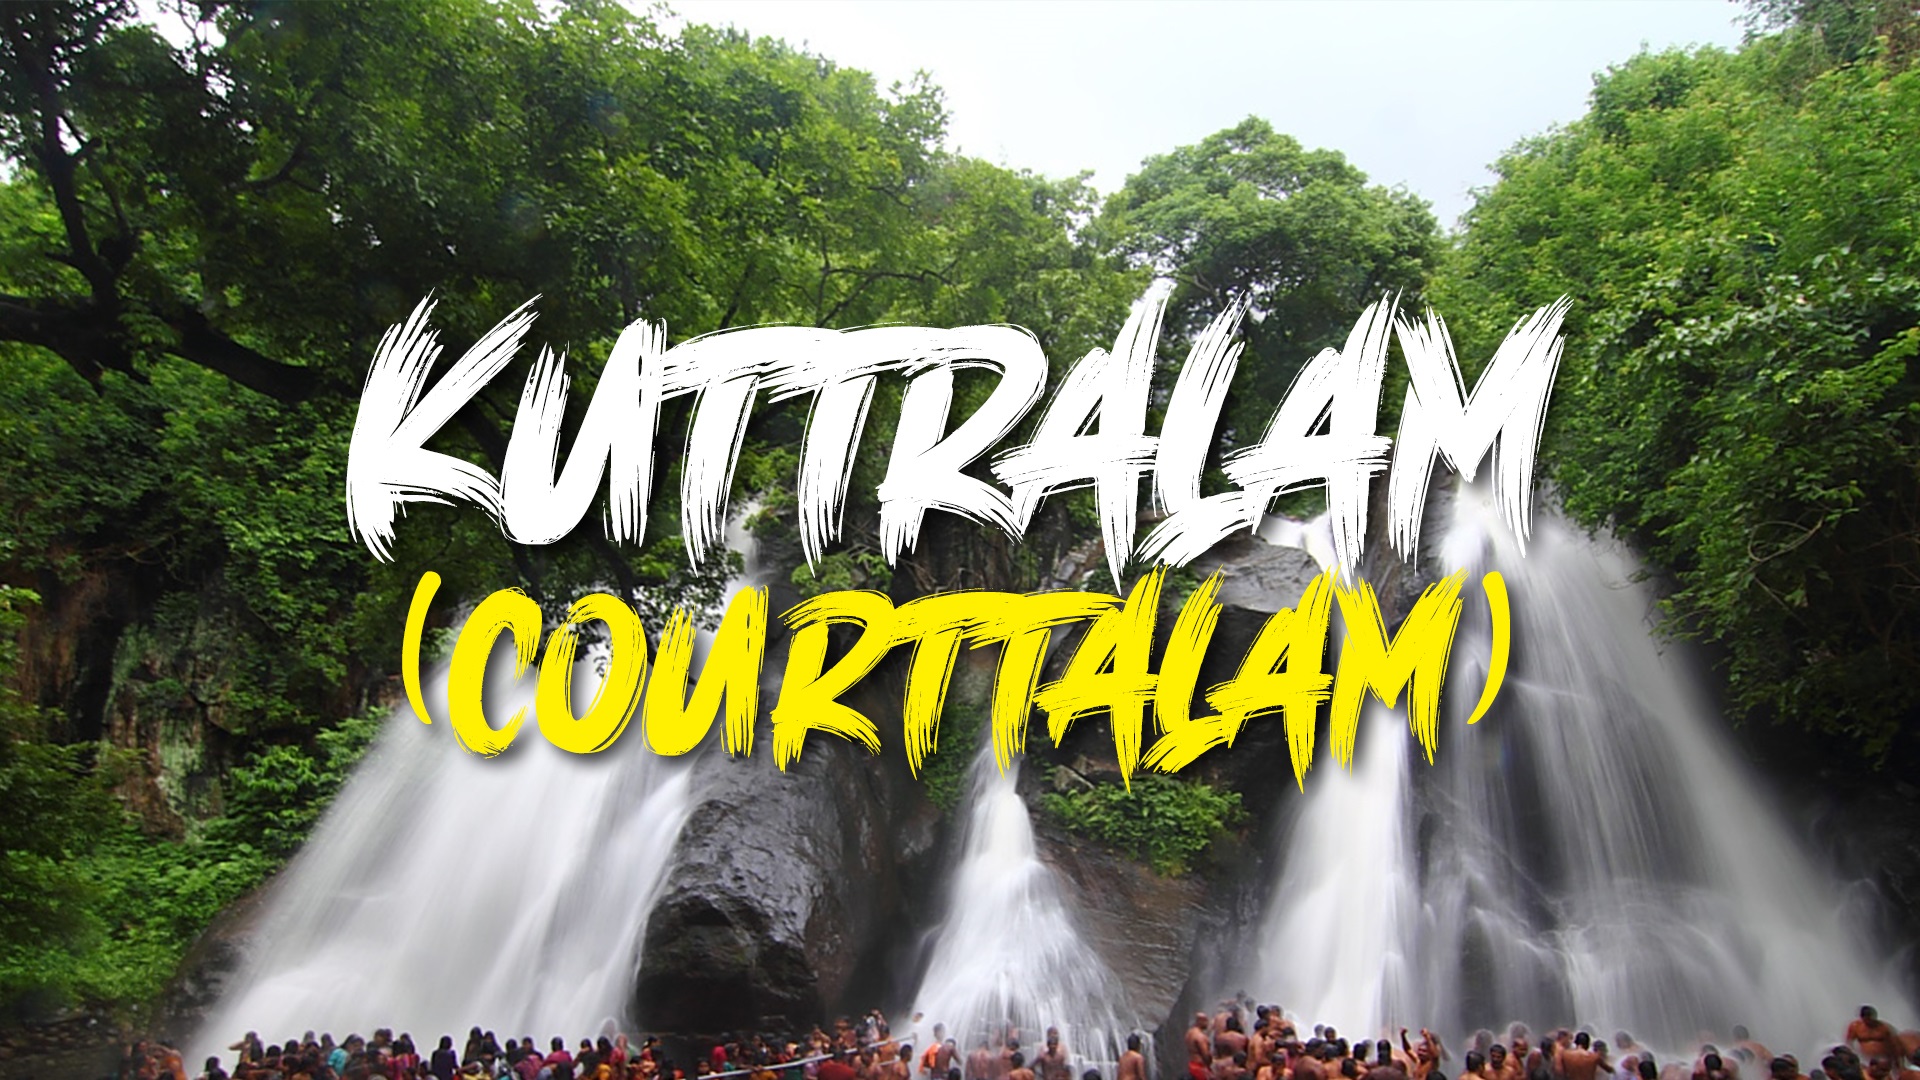 Courtallam - A Rare Low Altitude Hill Station